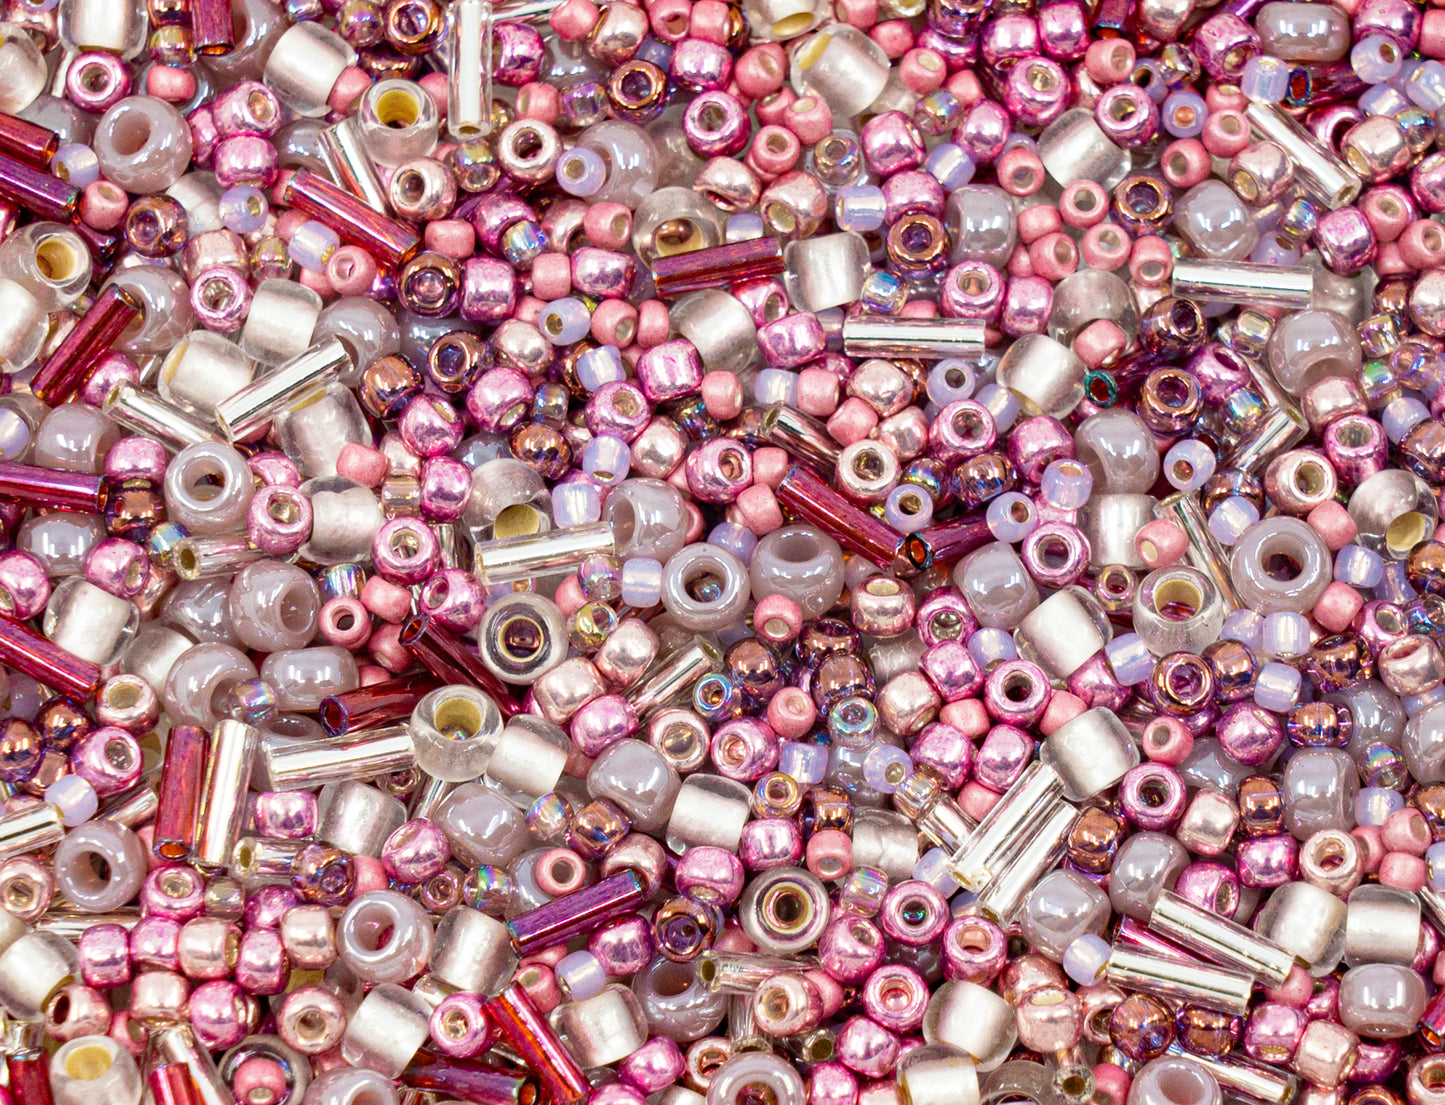 TOHO mix - small Rocailles, Seed Beads and Bugles, Japan, Mix Pink (like 3215 - Hime)